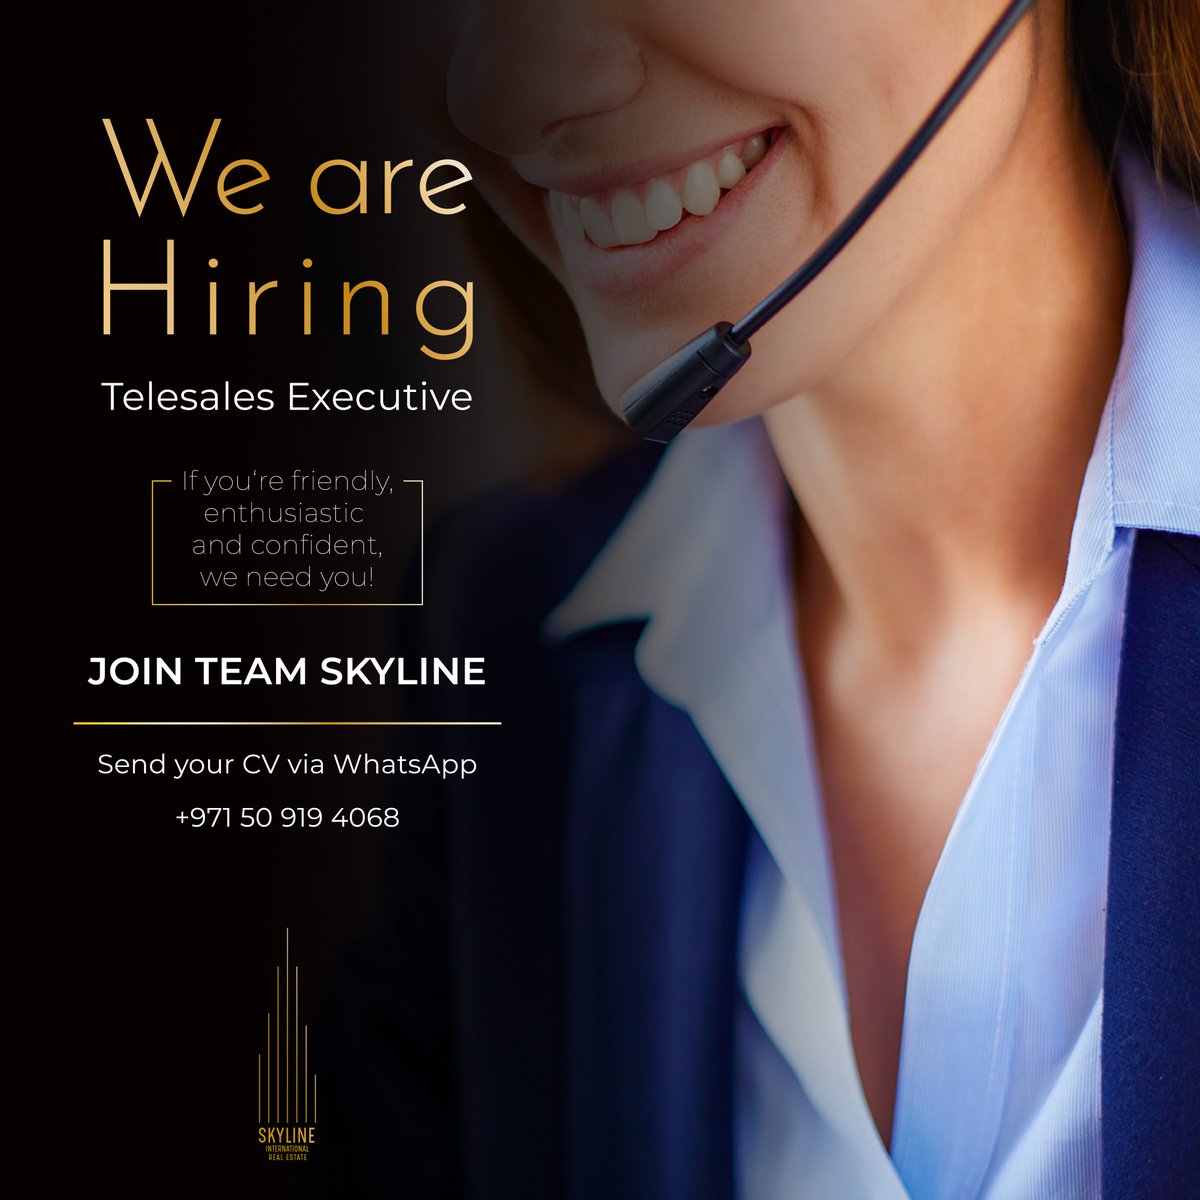 Skyline International #RealEstate is expanding and currently looking for a #Telesales Executive to join our growing team.

If you feel like you’re the one we’re looking for, send us your #CV / #resume through #WhatsApp: +971 50 919 4068.

#dubaijob #HIRINGNOW #HiringAlert #Jobs